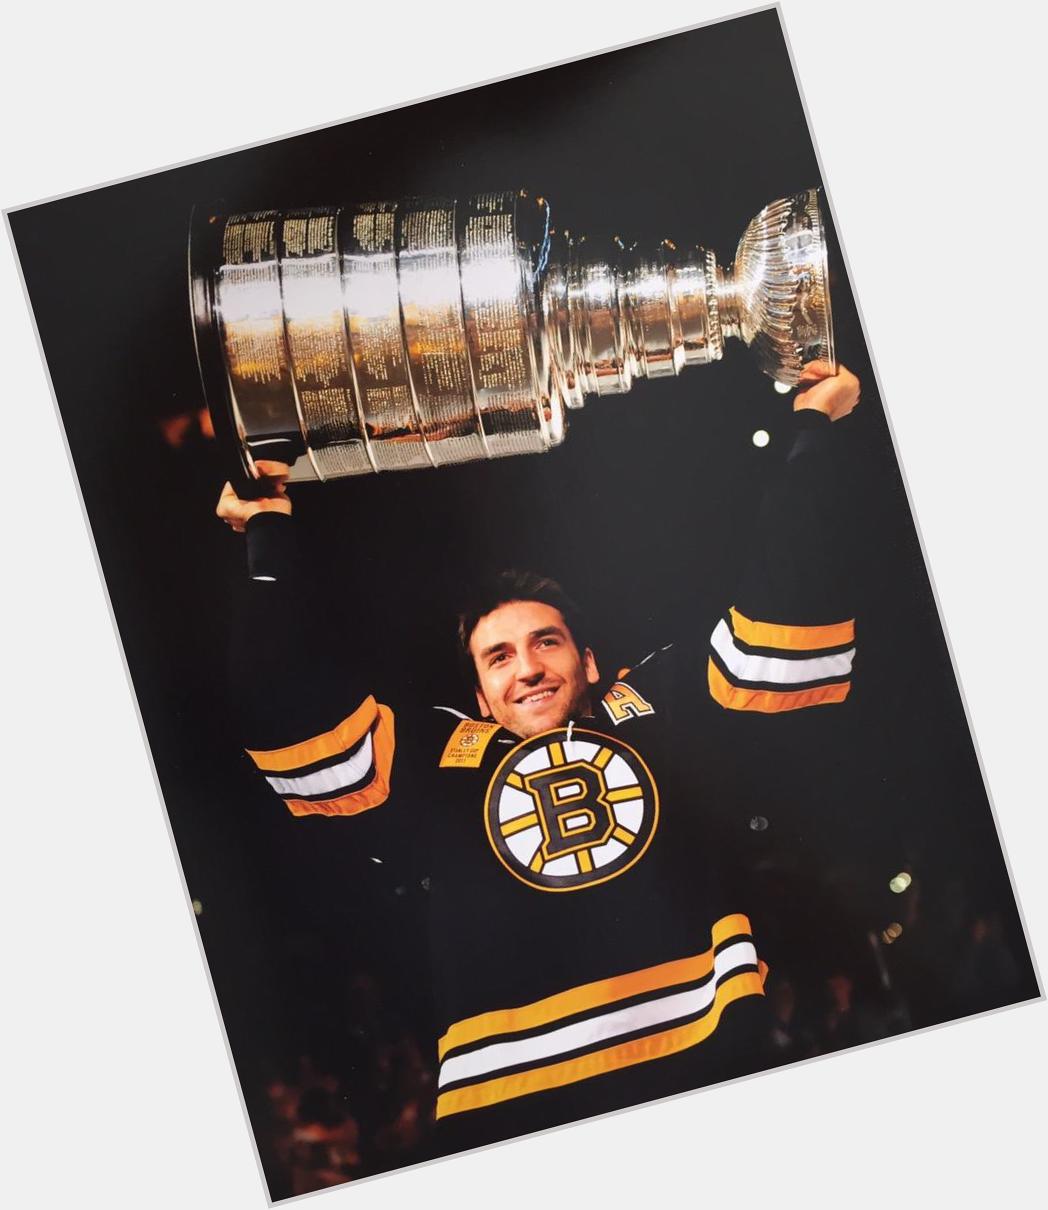 Happy 30th birthday to the man that keeps us believing, Patrice Bergeron! Stay perfect my friend. 